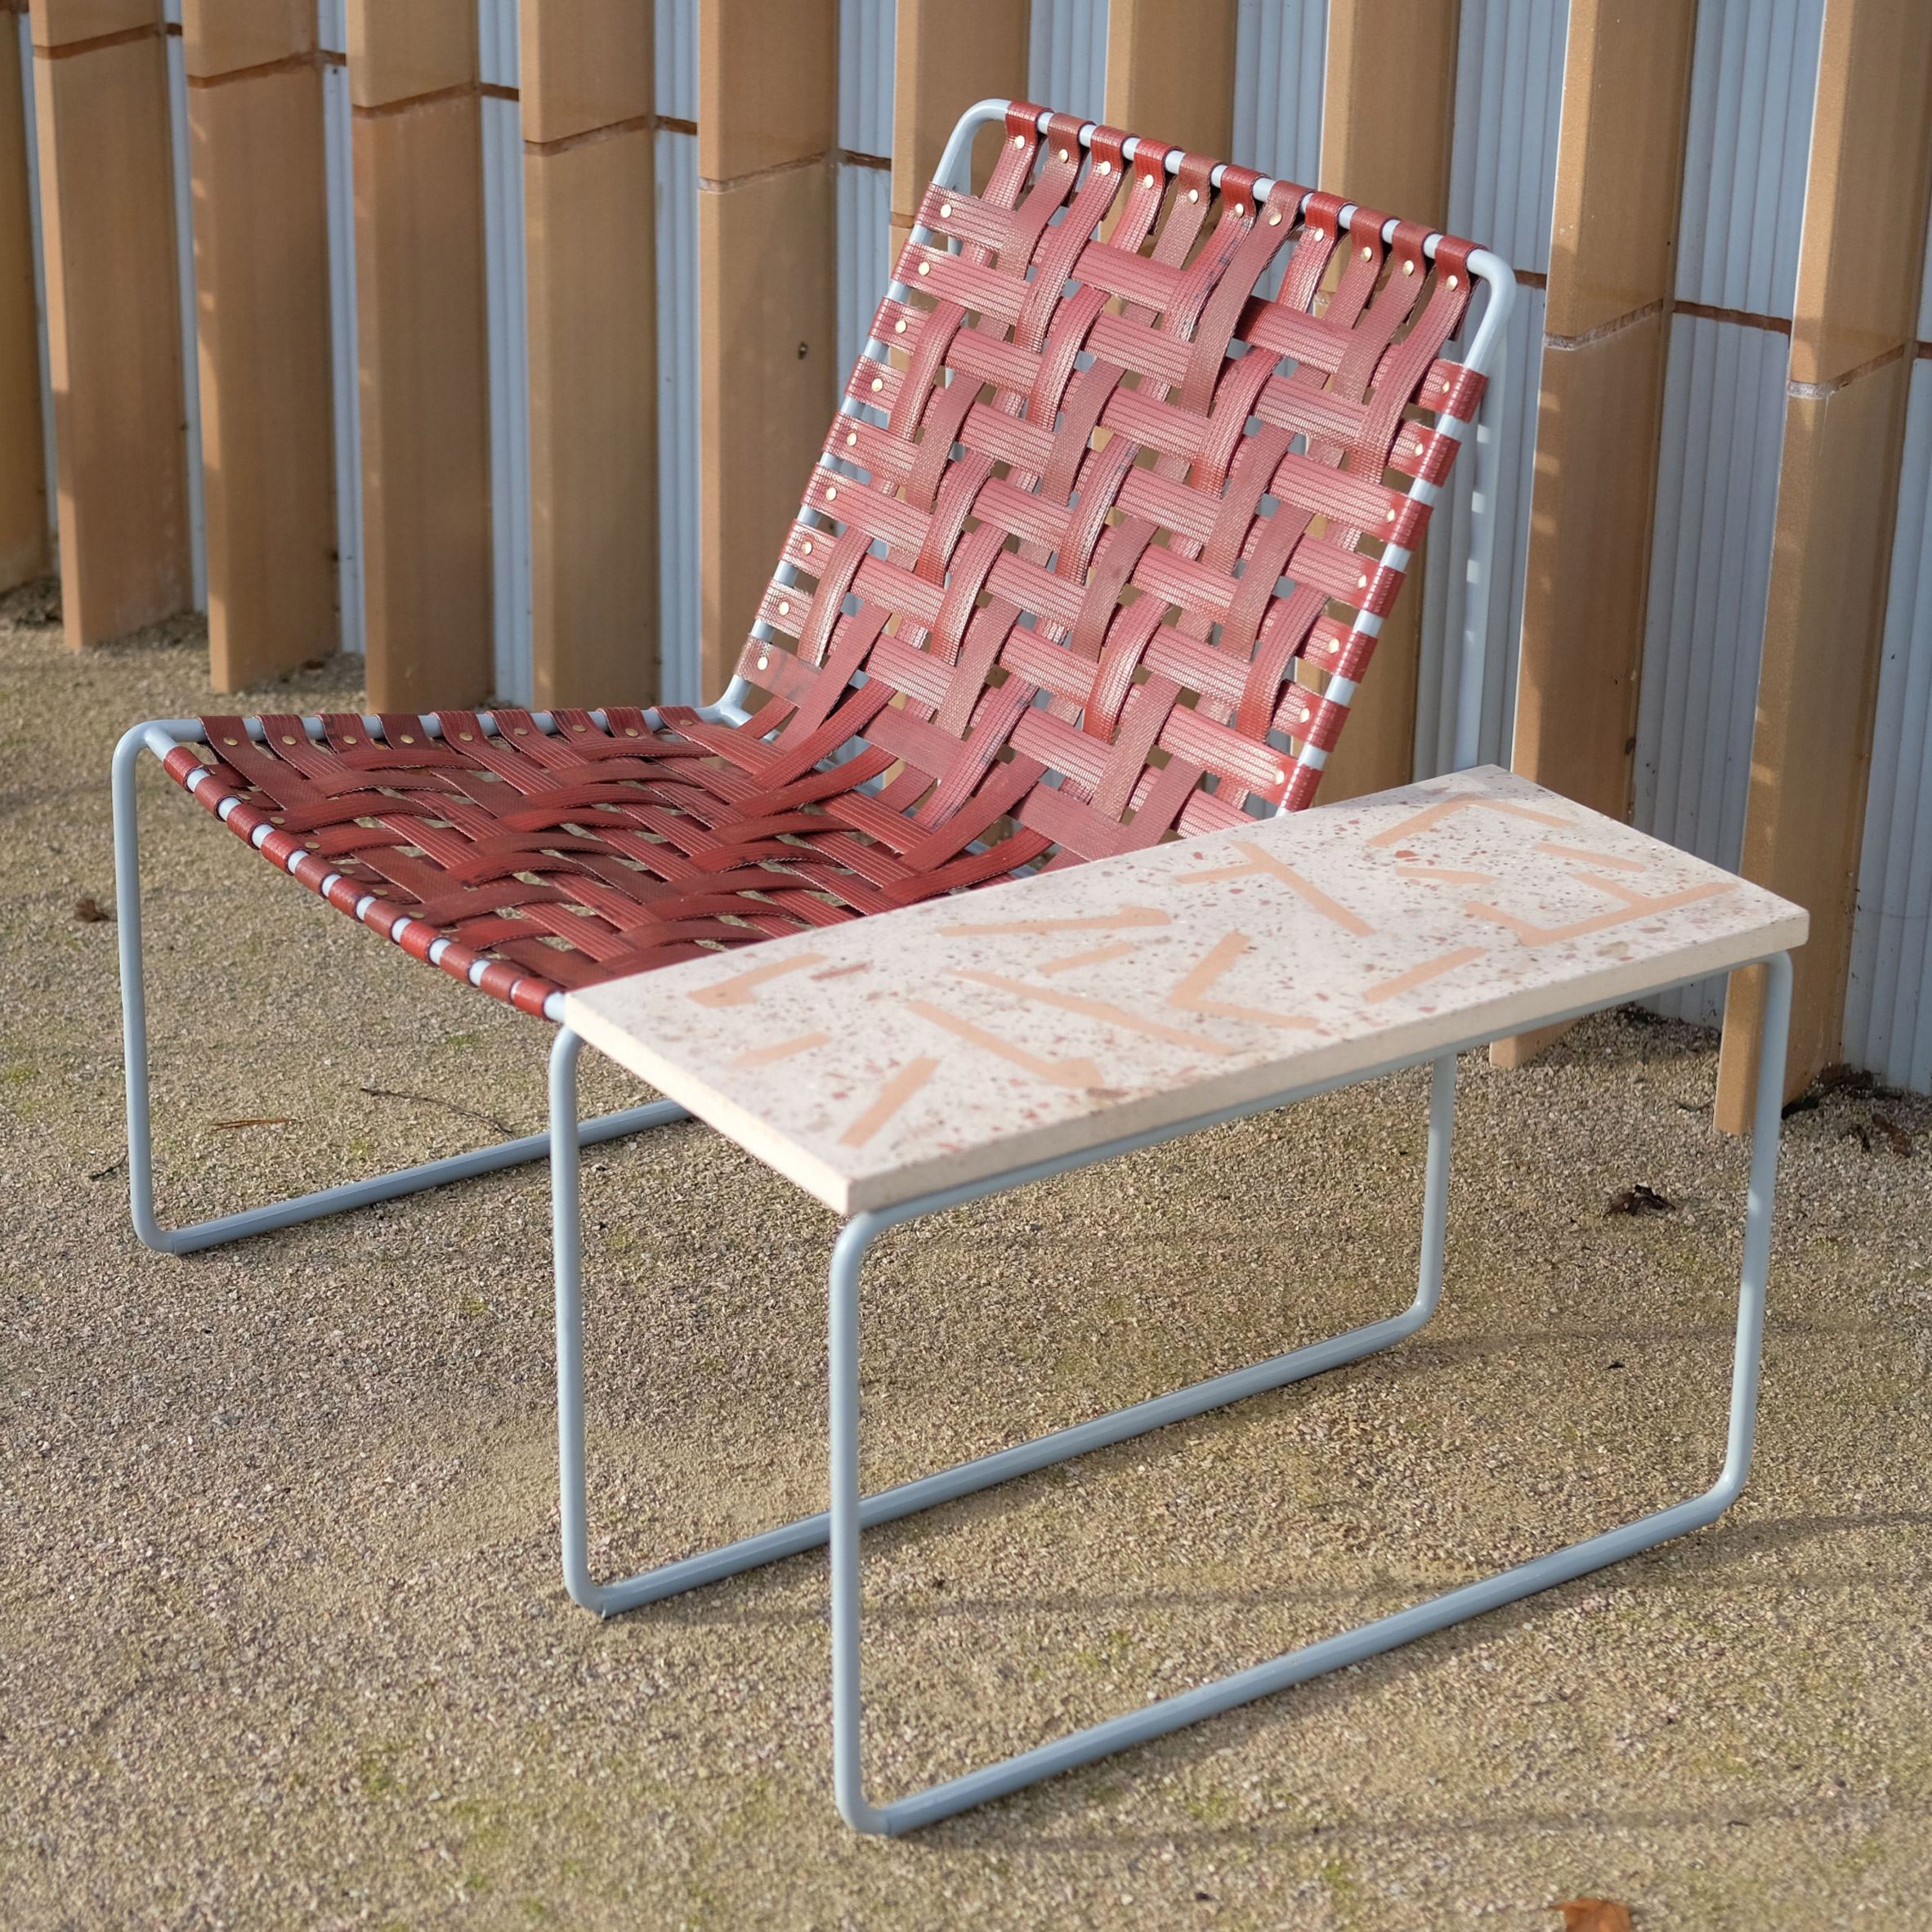 Woven red lounge chair with terrazzo sidetable by Local Works Studio